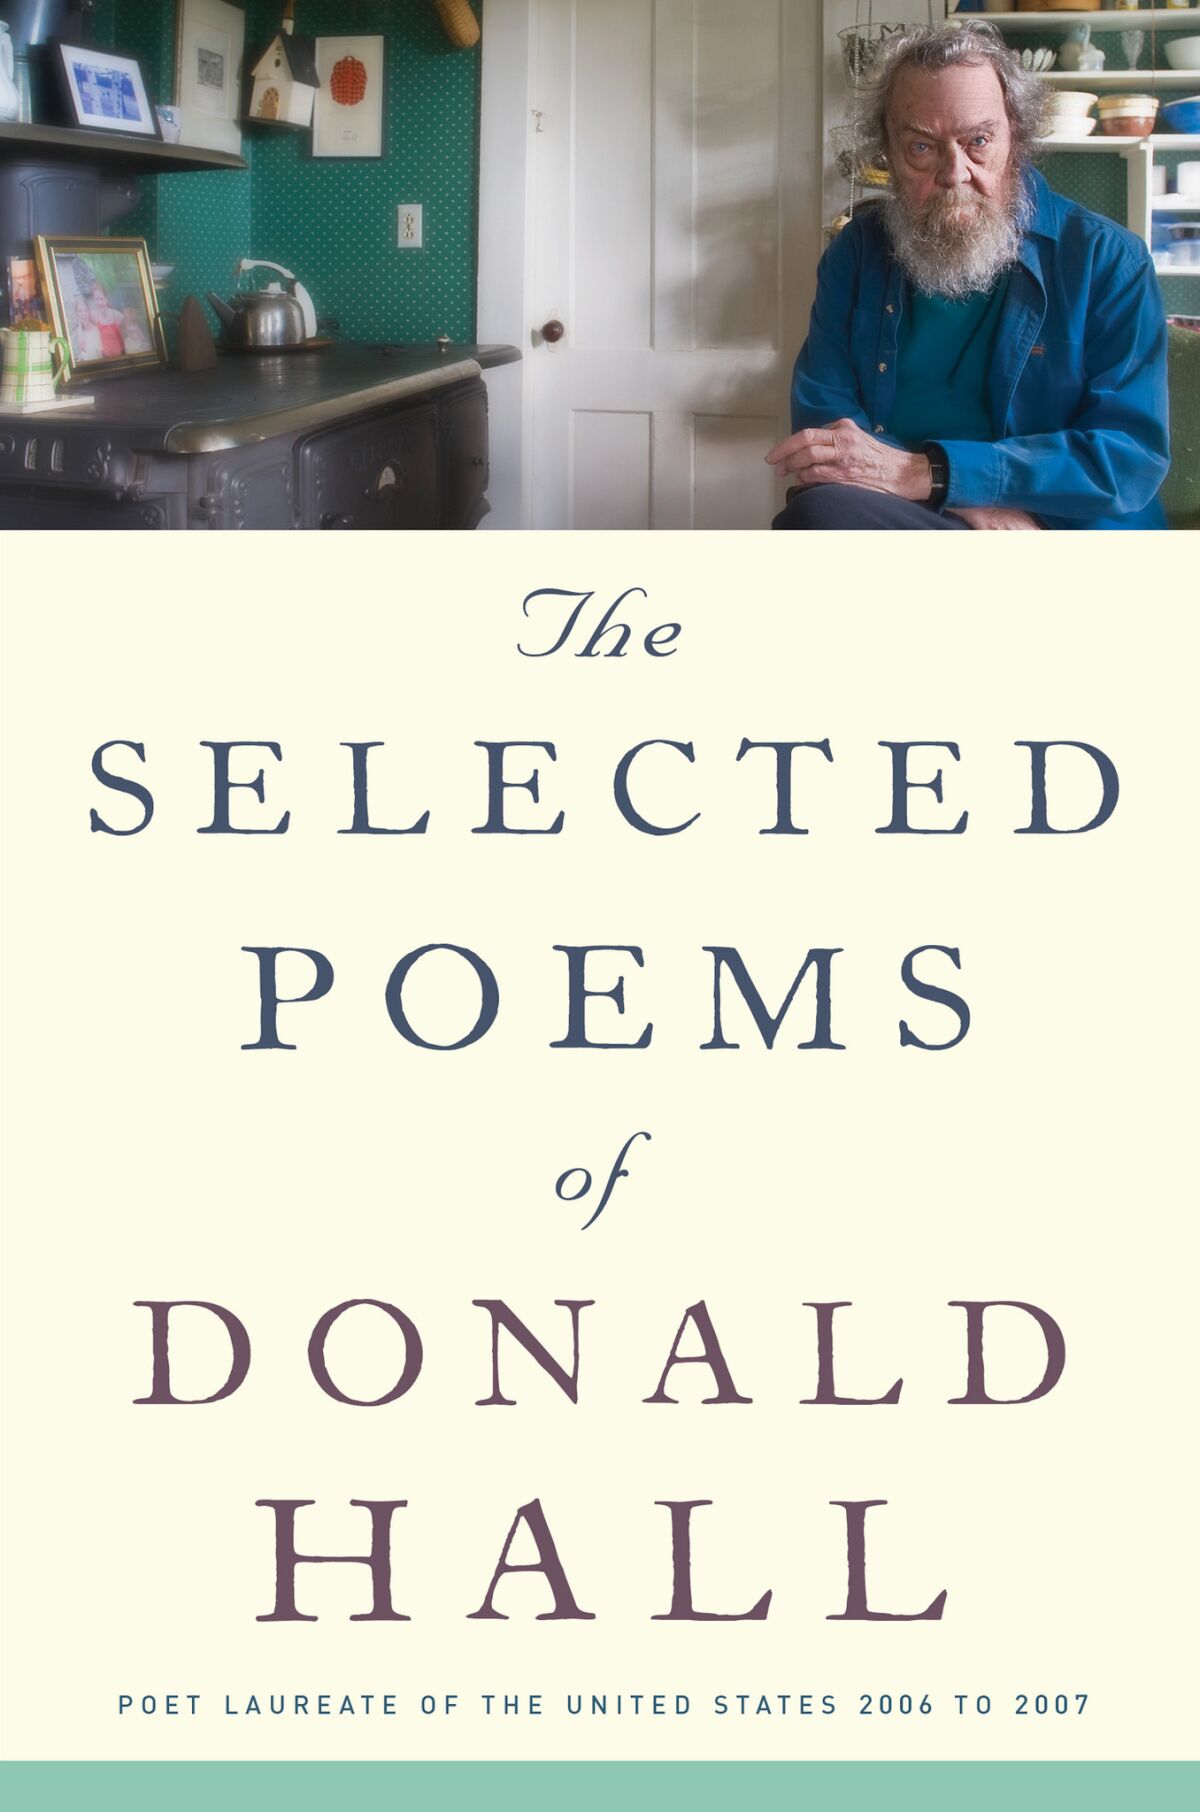 "The Selected Poems of Donald Hall"